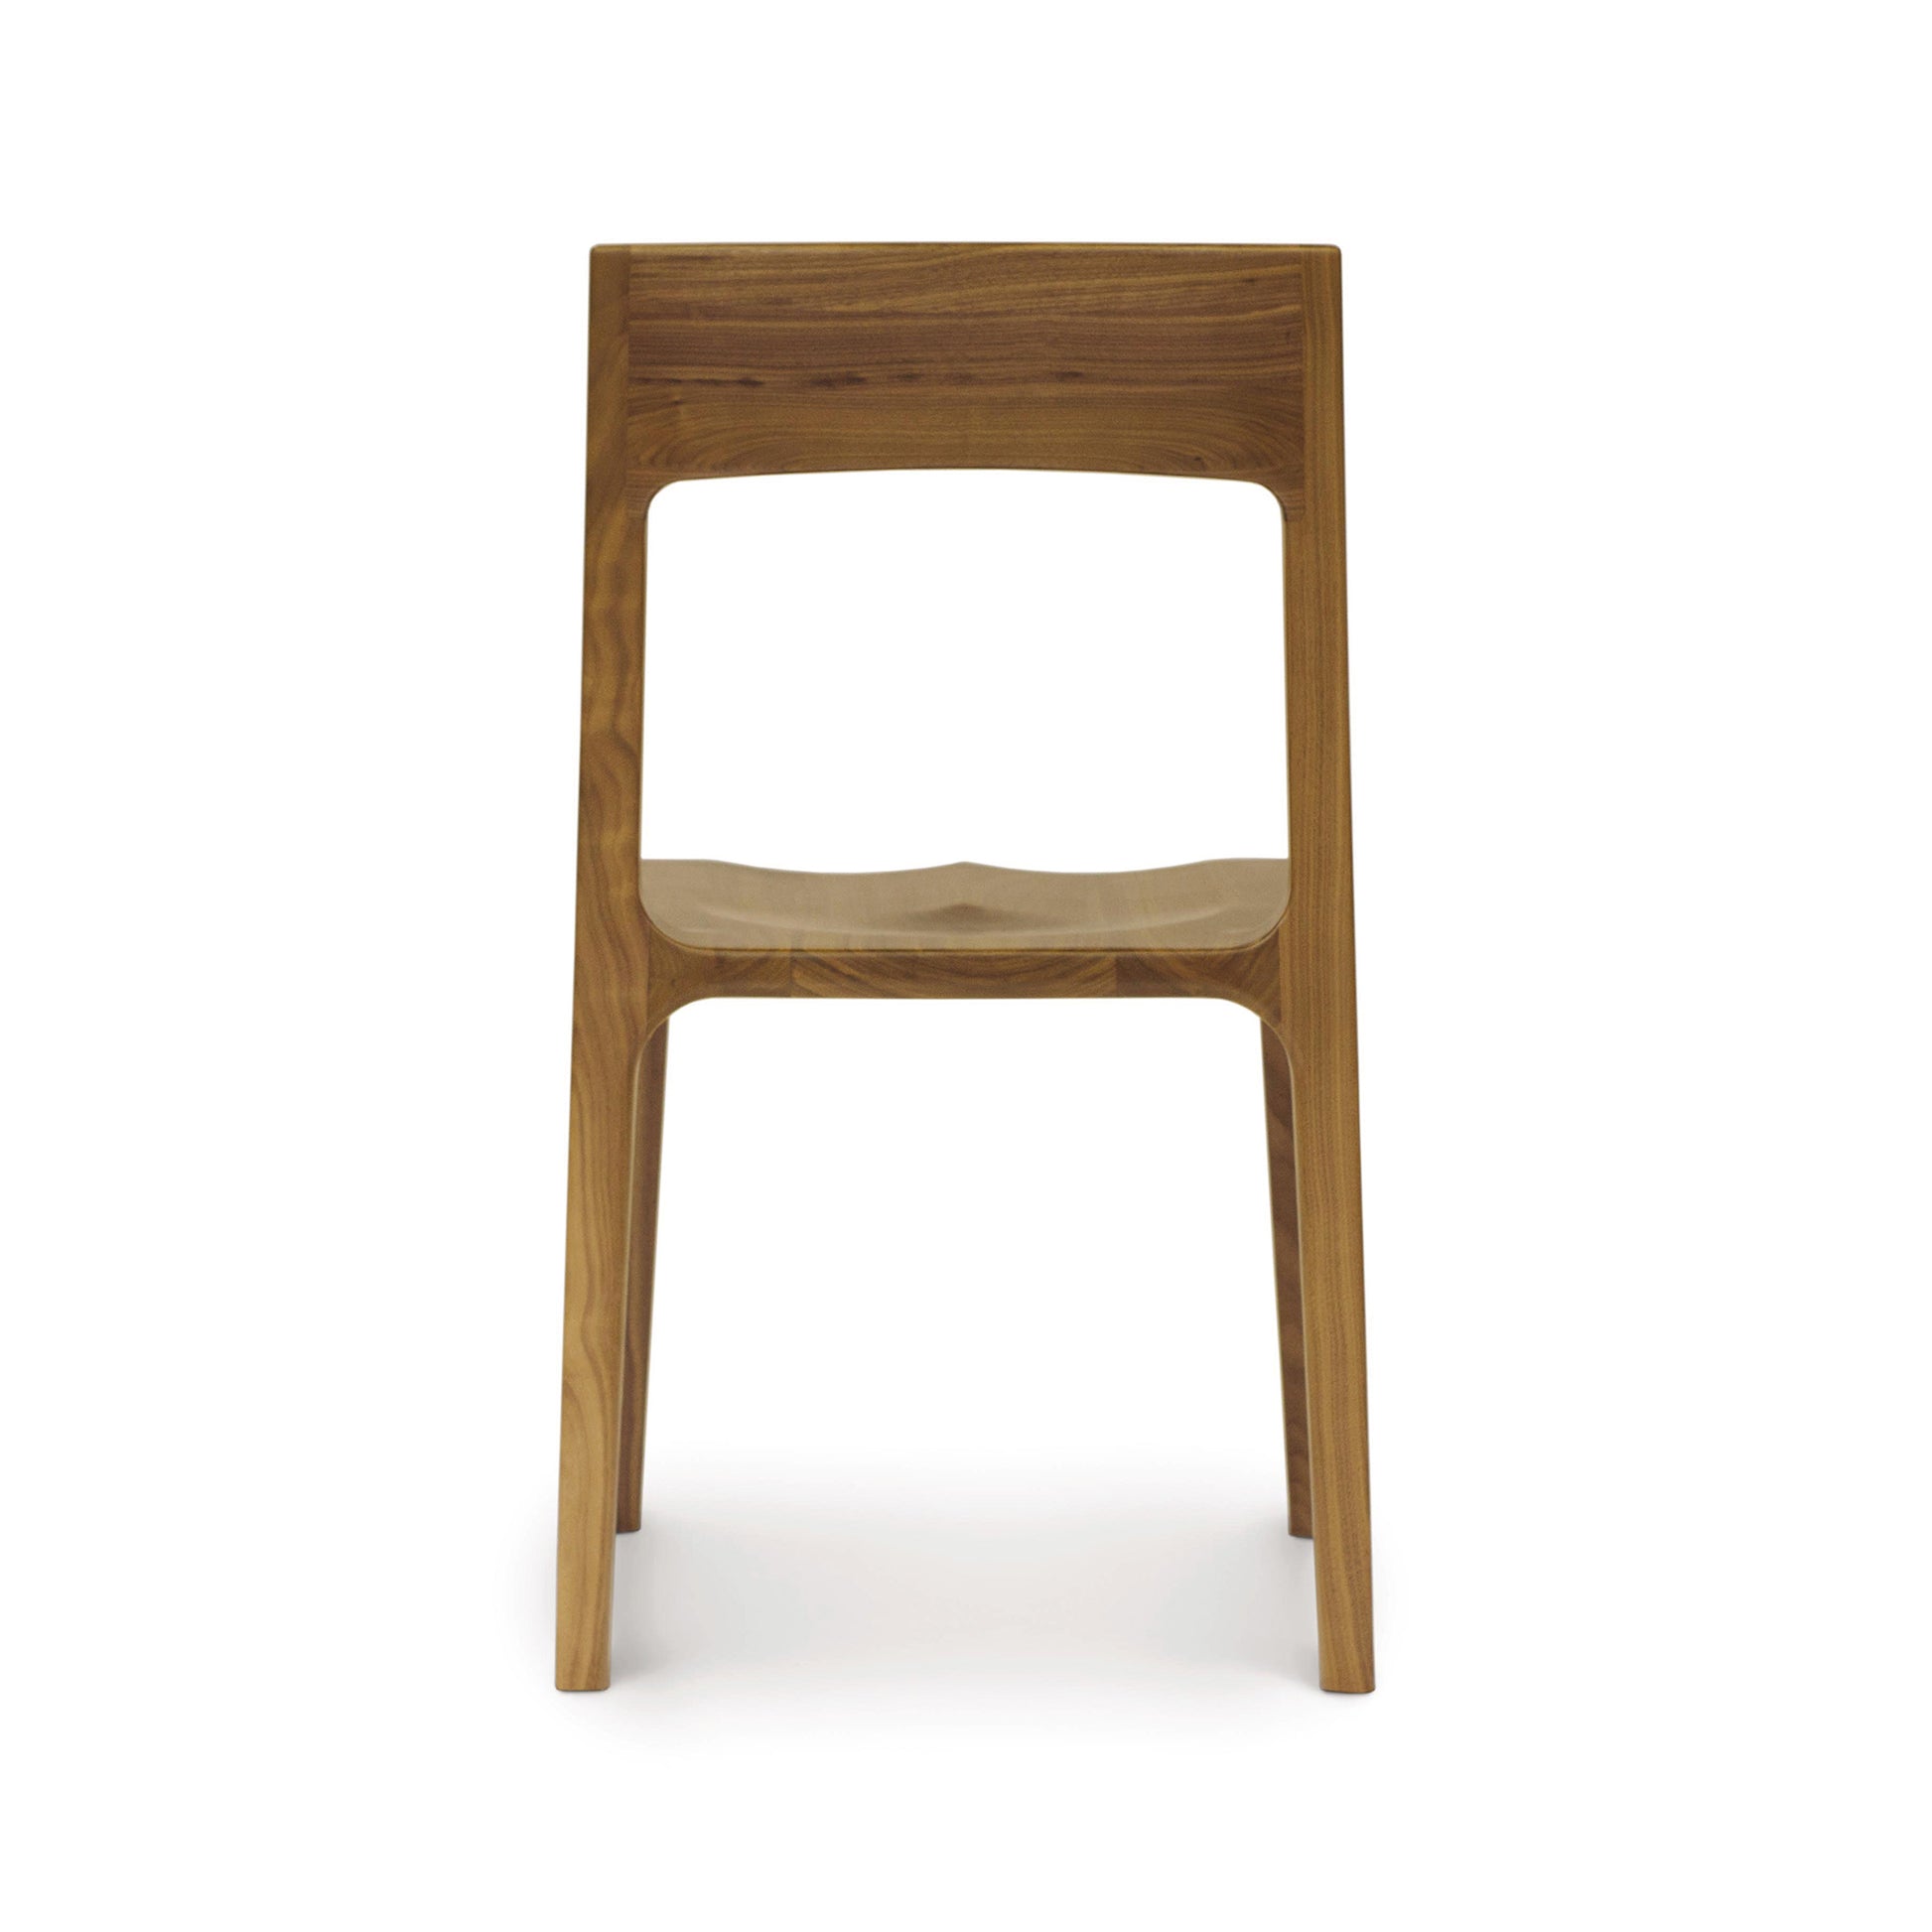 A Lisse Dining Chair from the Copeland Furniture Lisse Furniture Collection, featuring a walnut frame with a modern design, solid back and square legs, displayed against a white background.